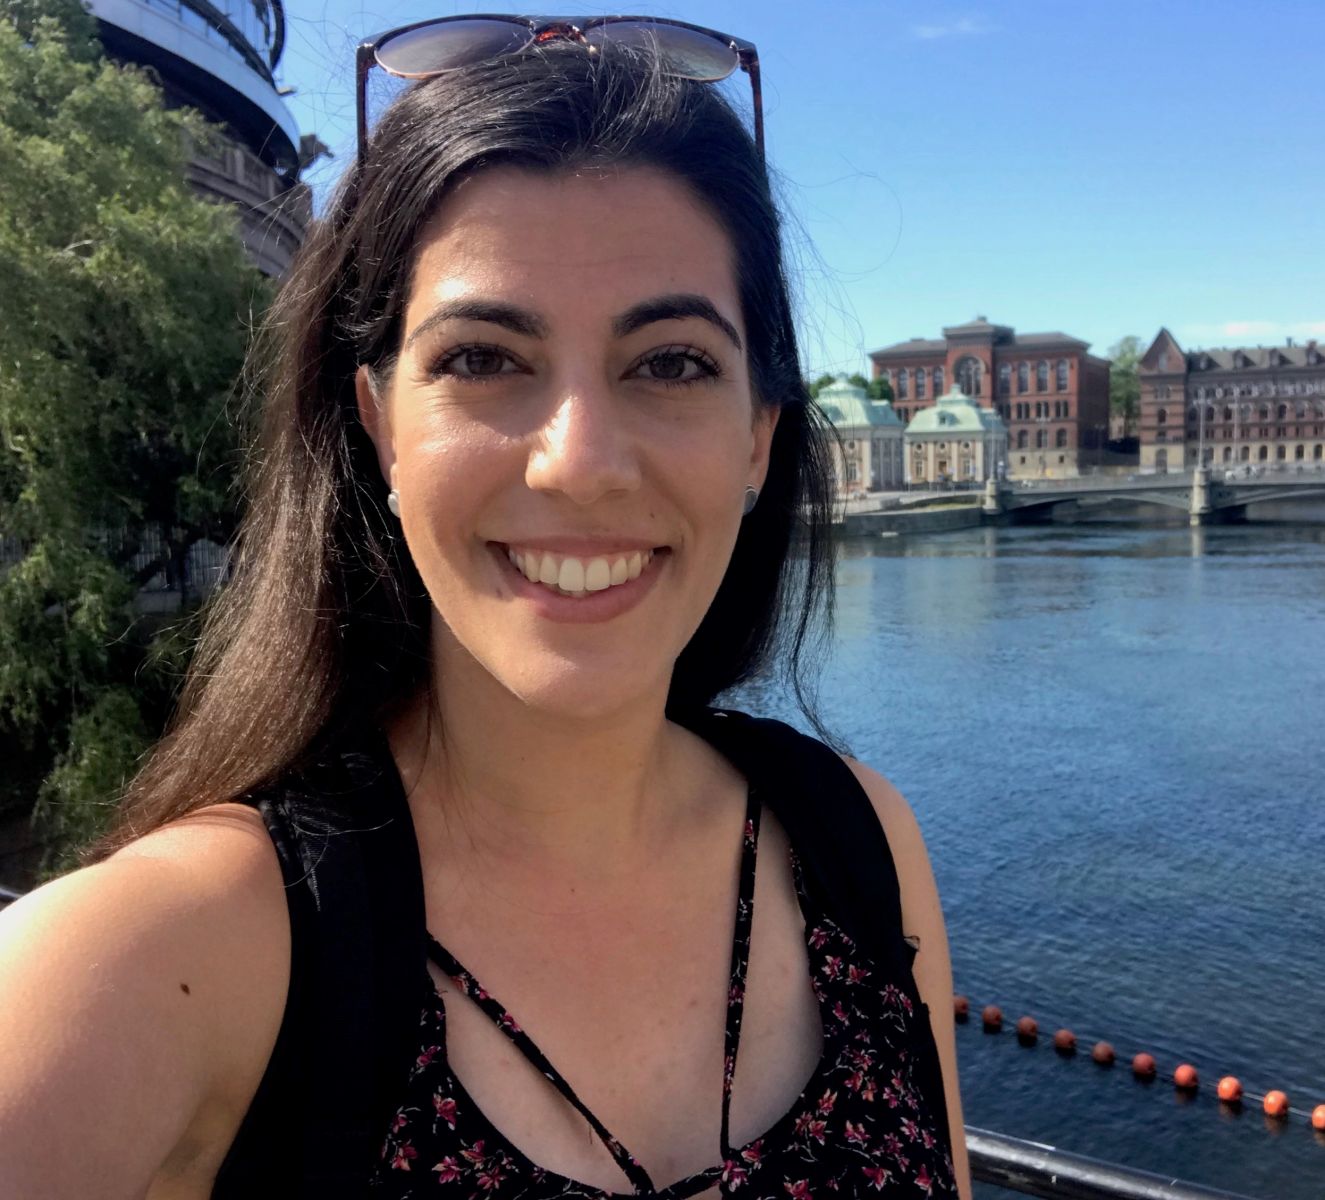 Image of Elizabeth Nelson, MA student, smiling in front of a canal.